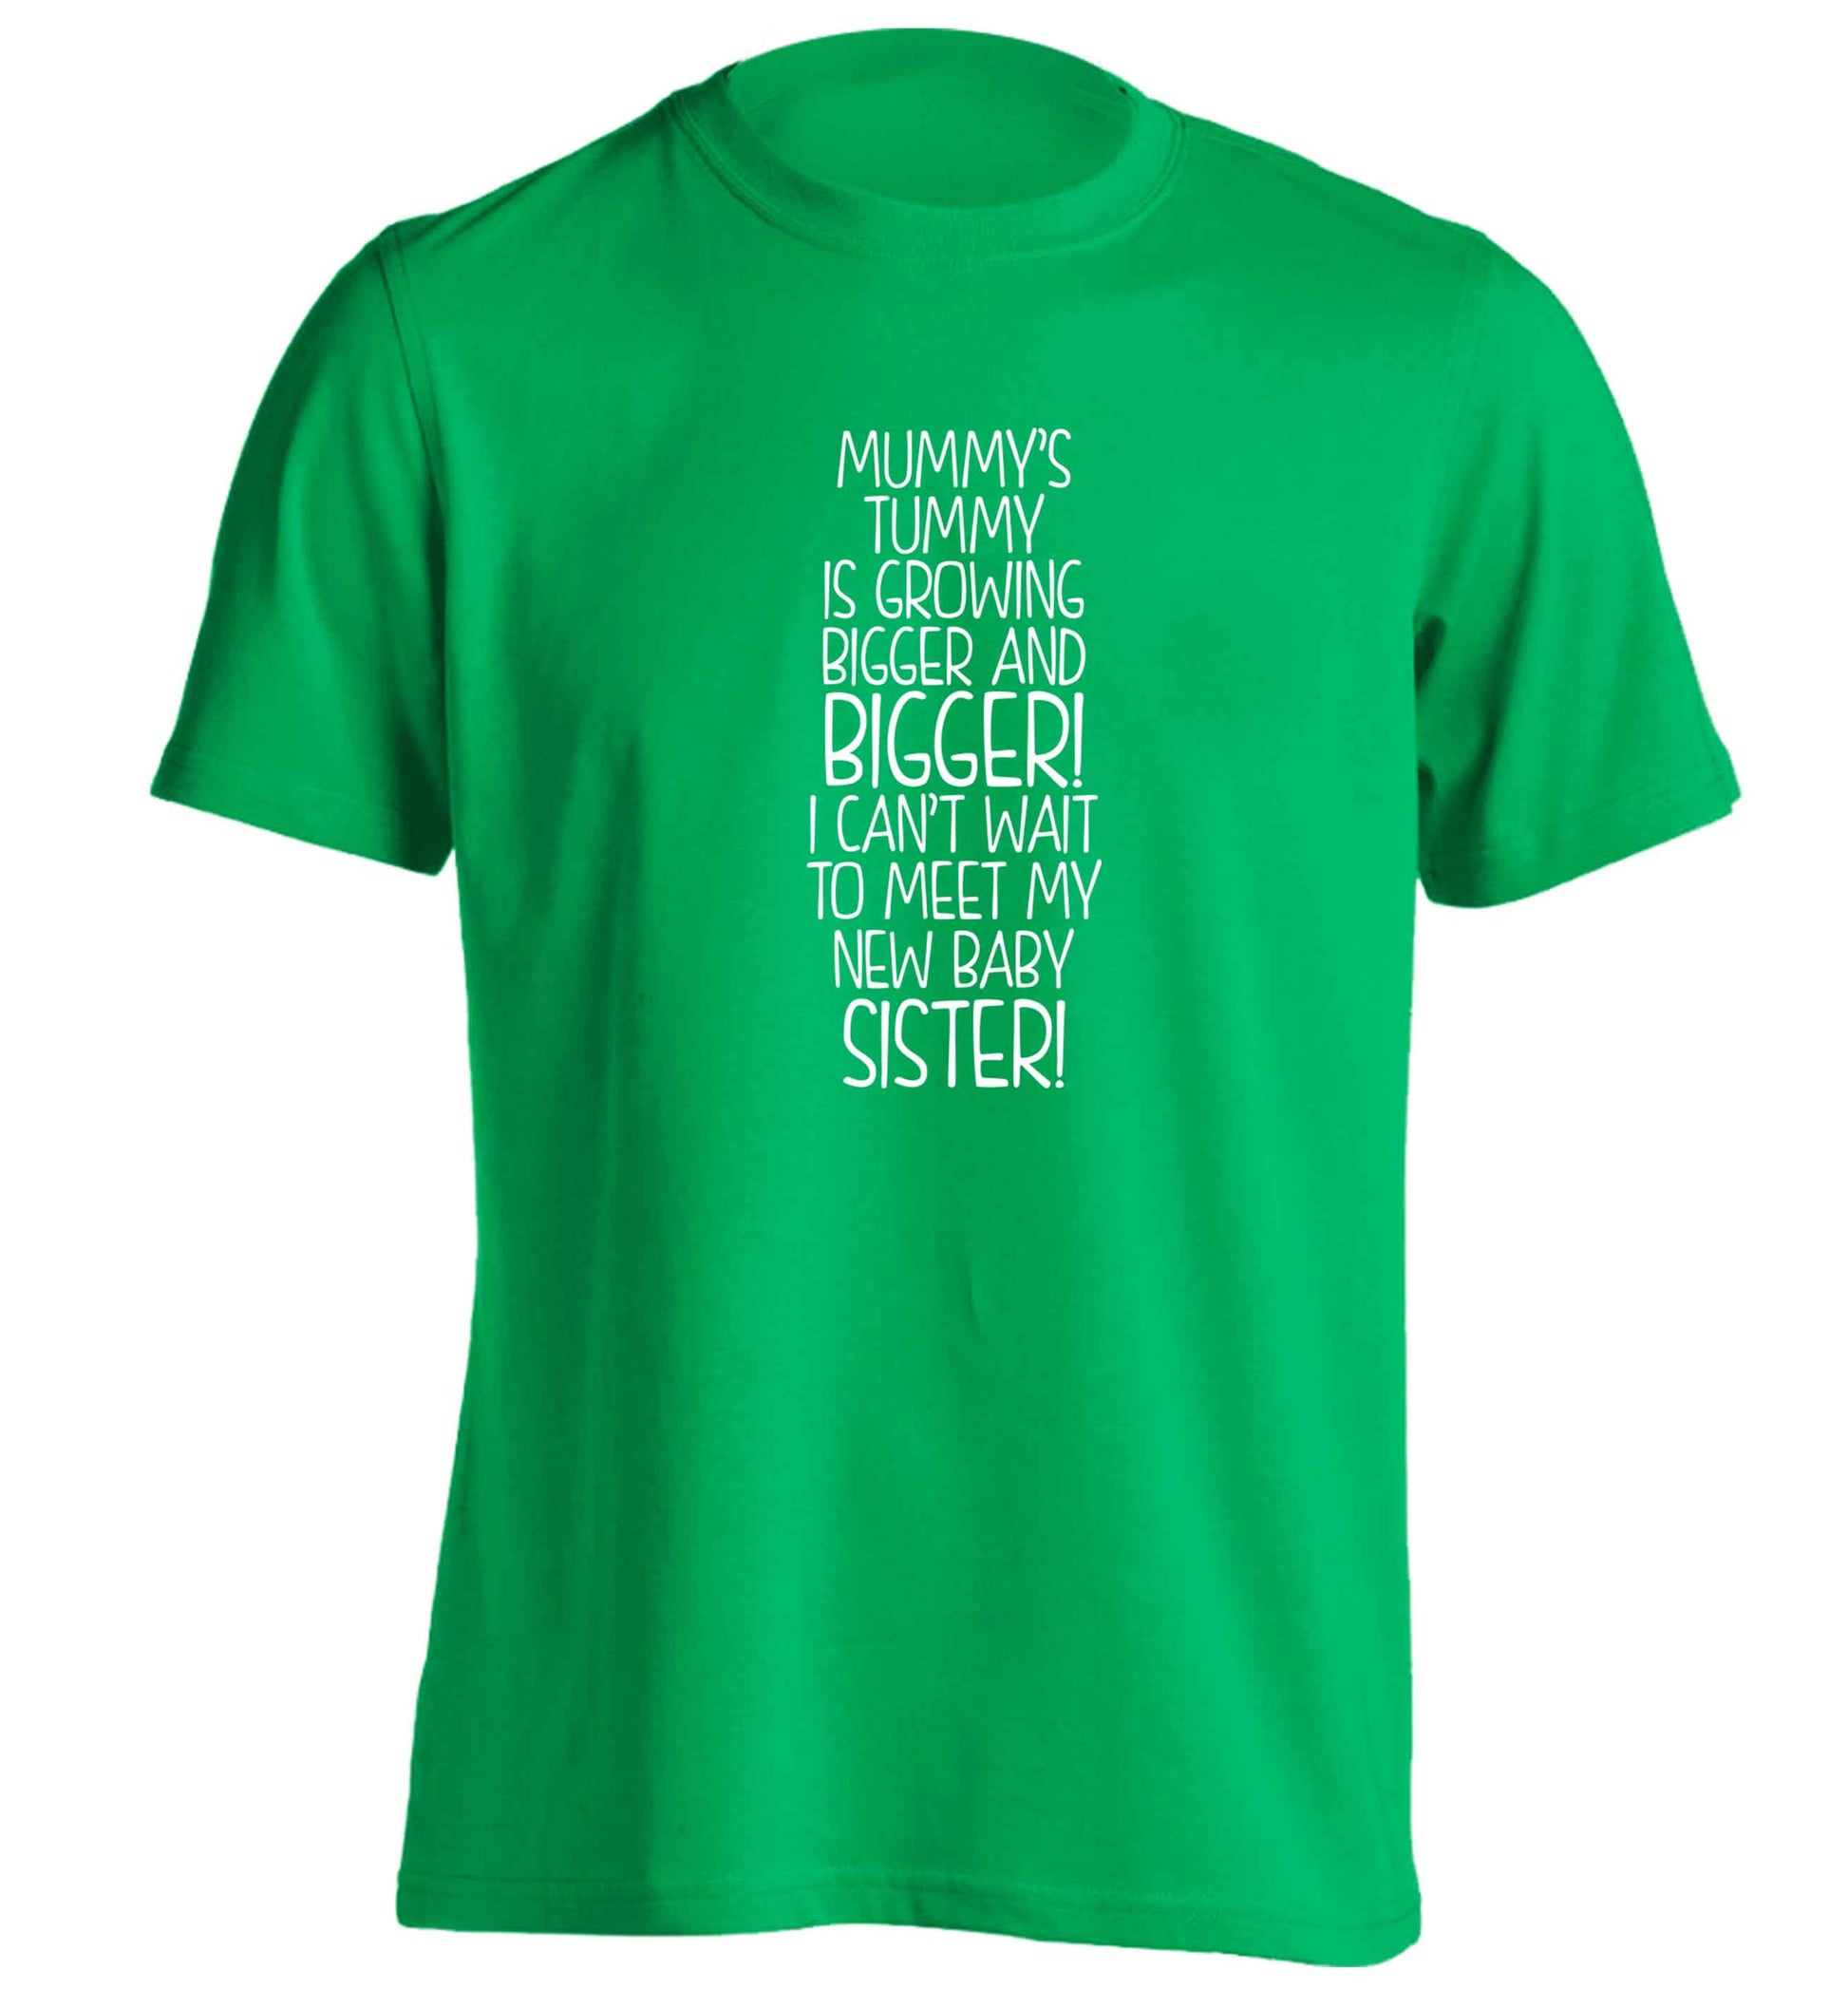 Mummy's tummy is growing bigger and bigger I can't wait to meet my new baby sister! adults unisex green Tshirt 2XL